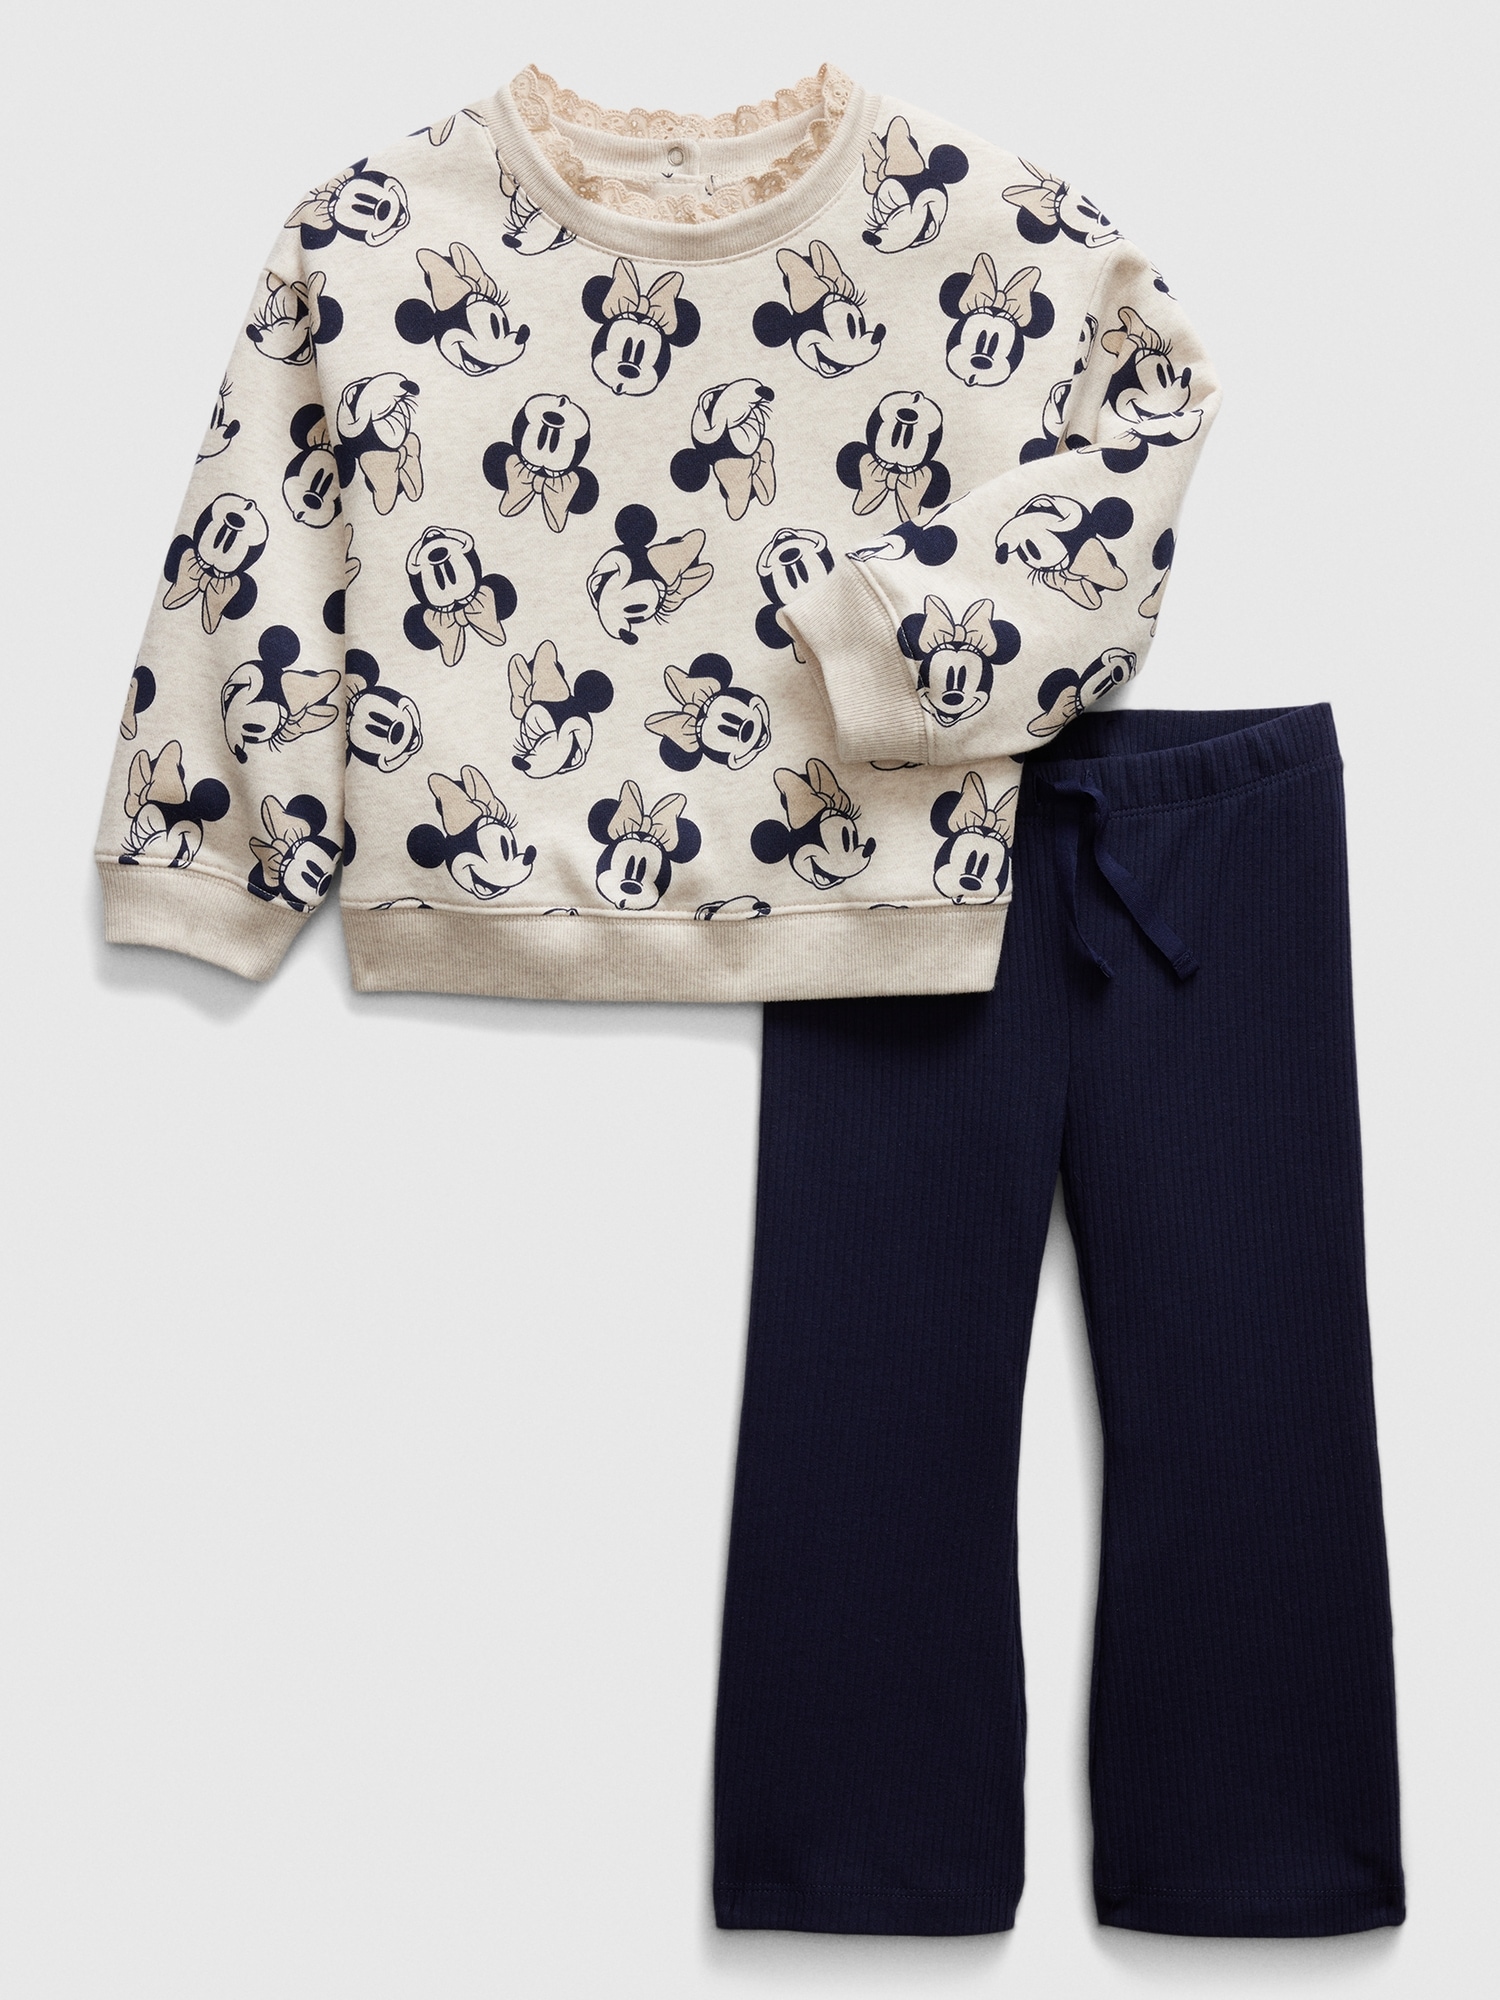 babyGap | Disney Minnie Mouse Two-Piece Outfit Set